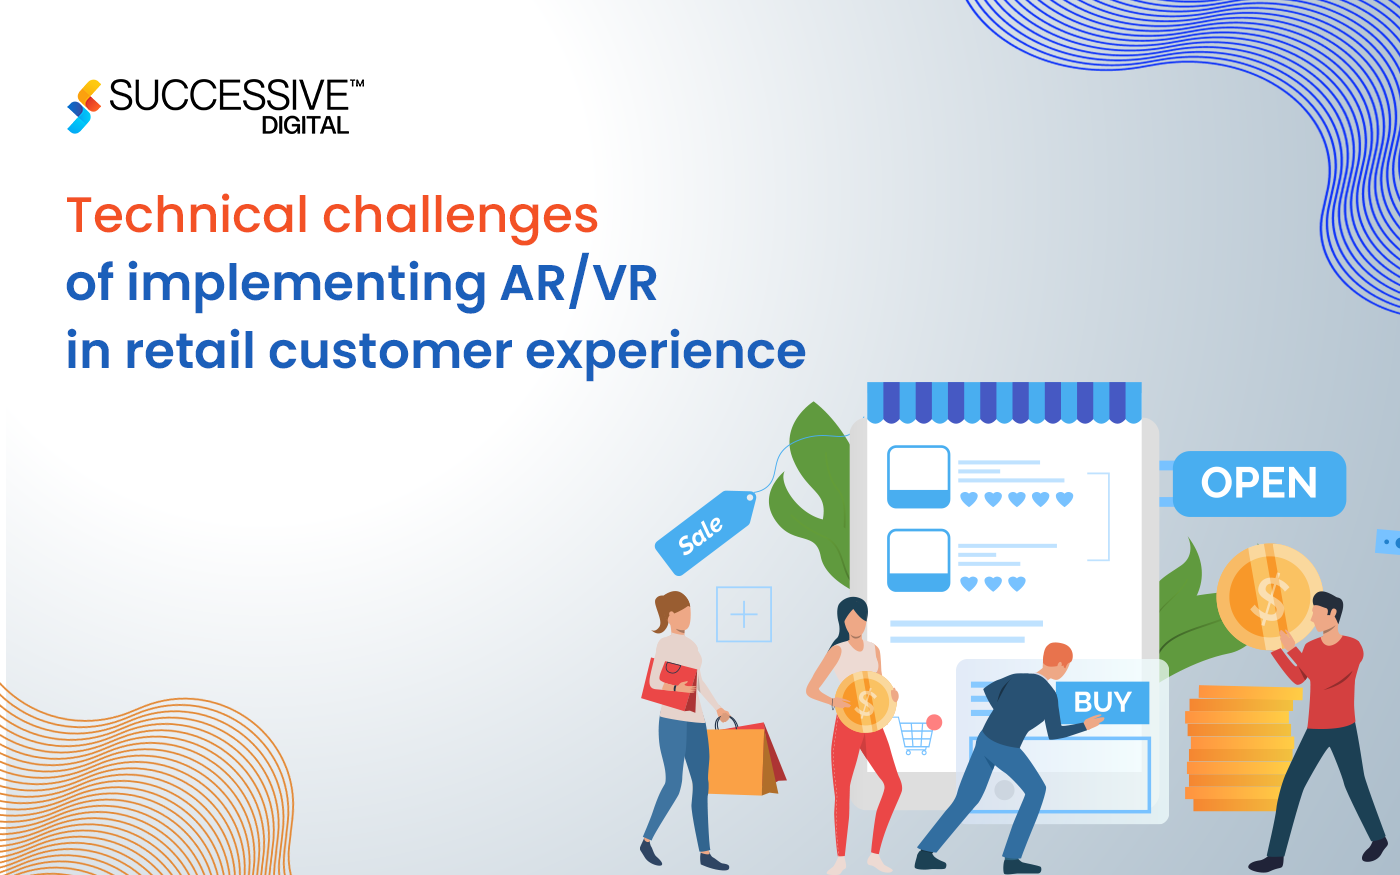 What are the Technical Challenges of Implementing AR/VR in Retail Customer Experience?